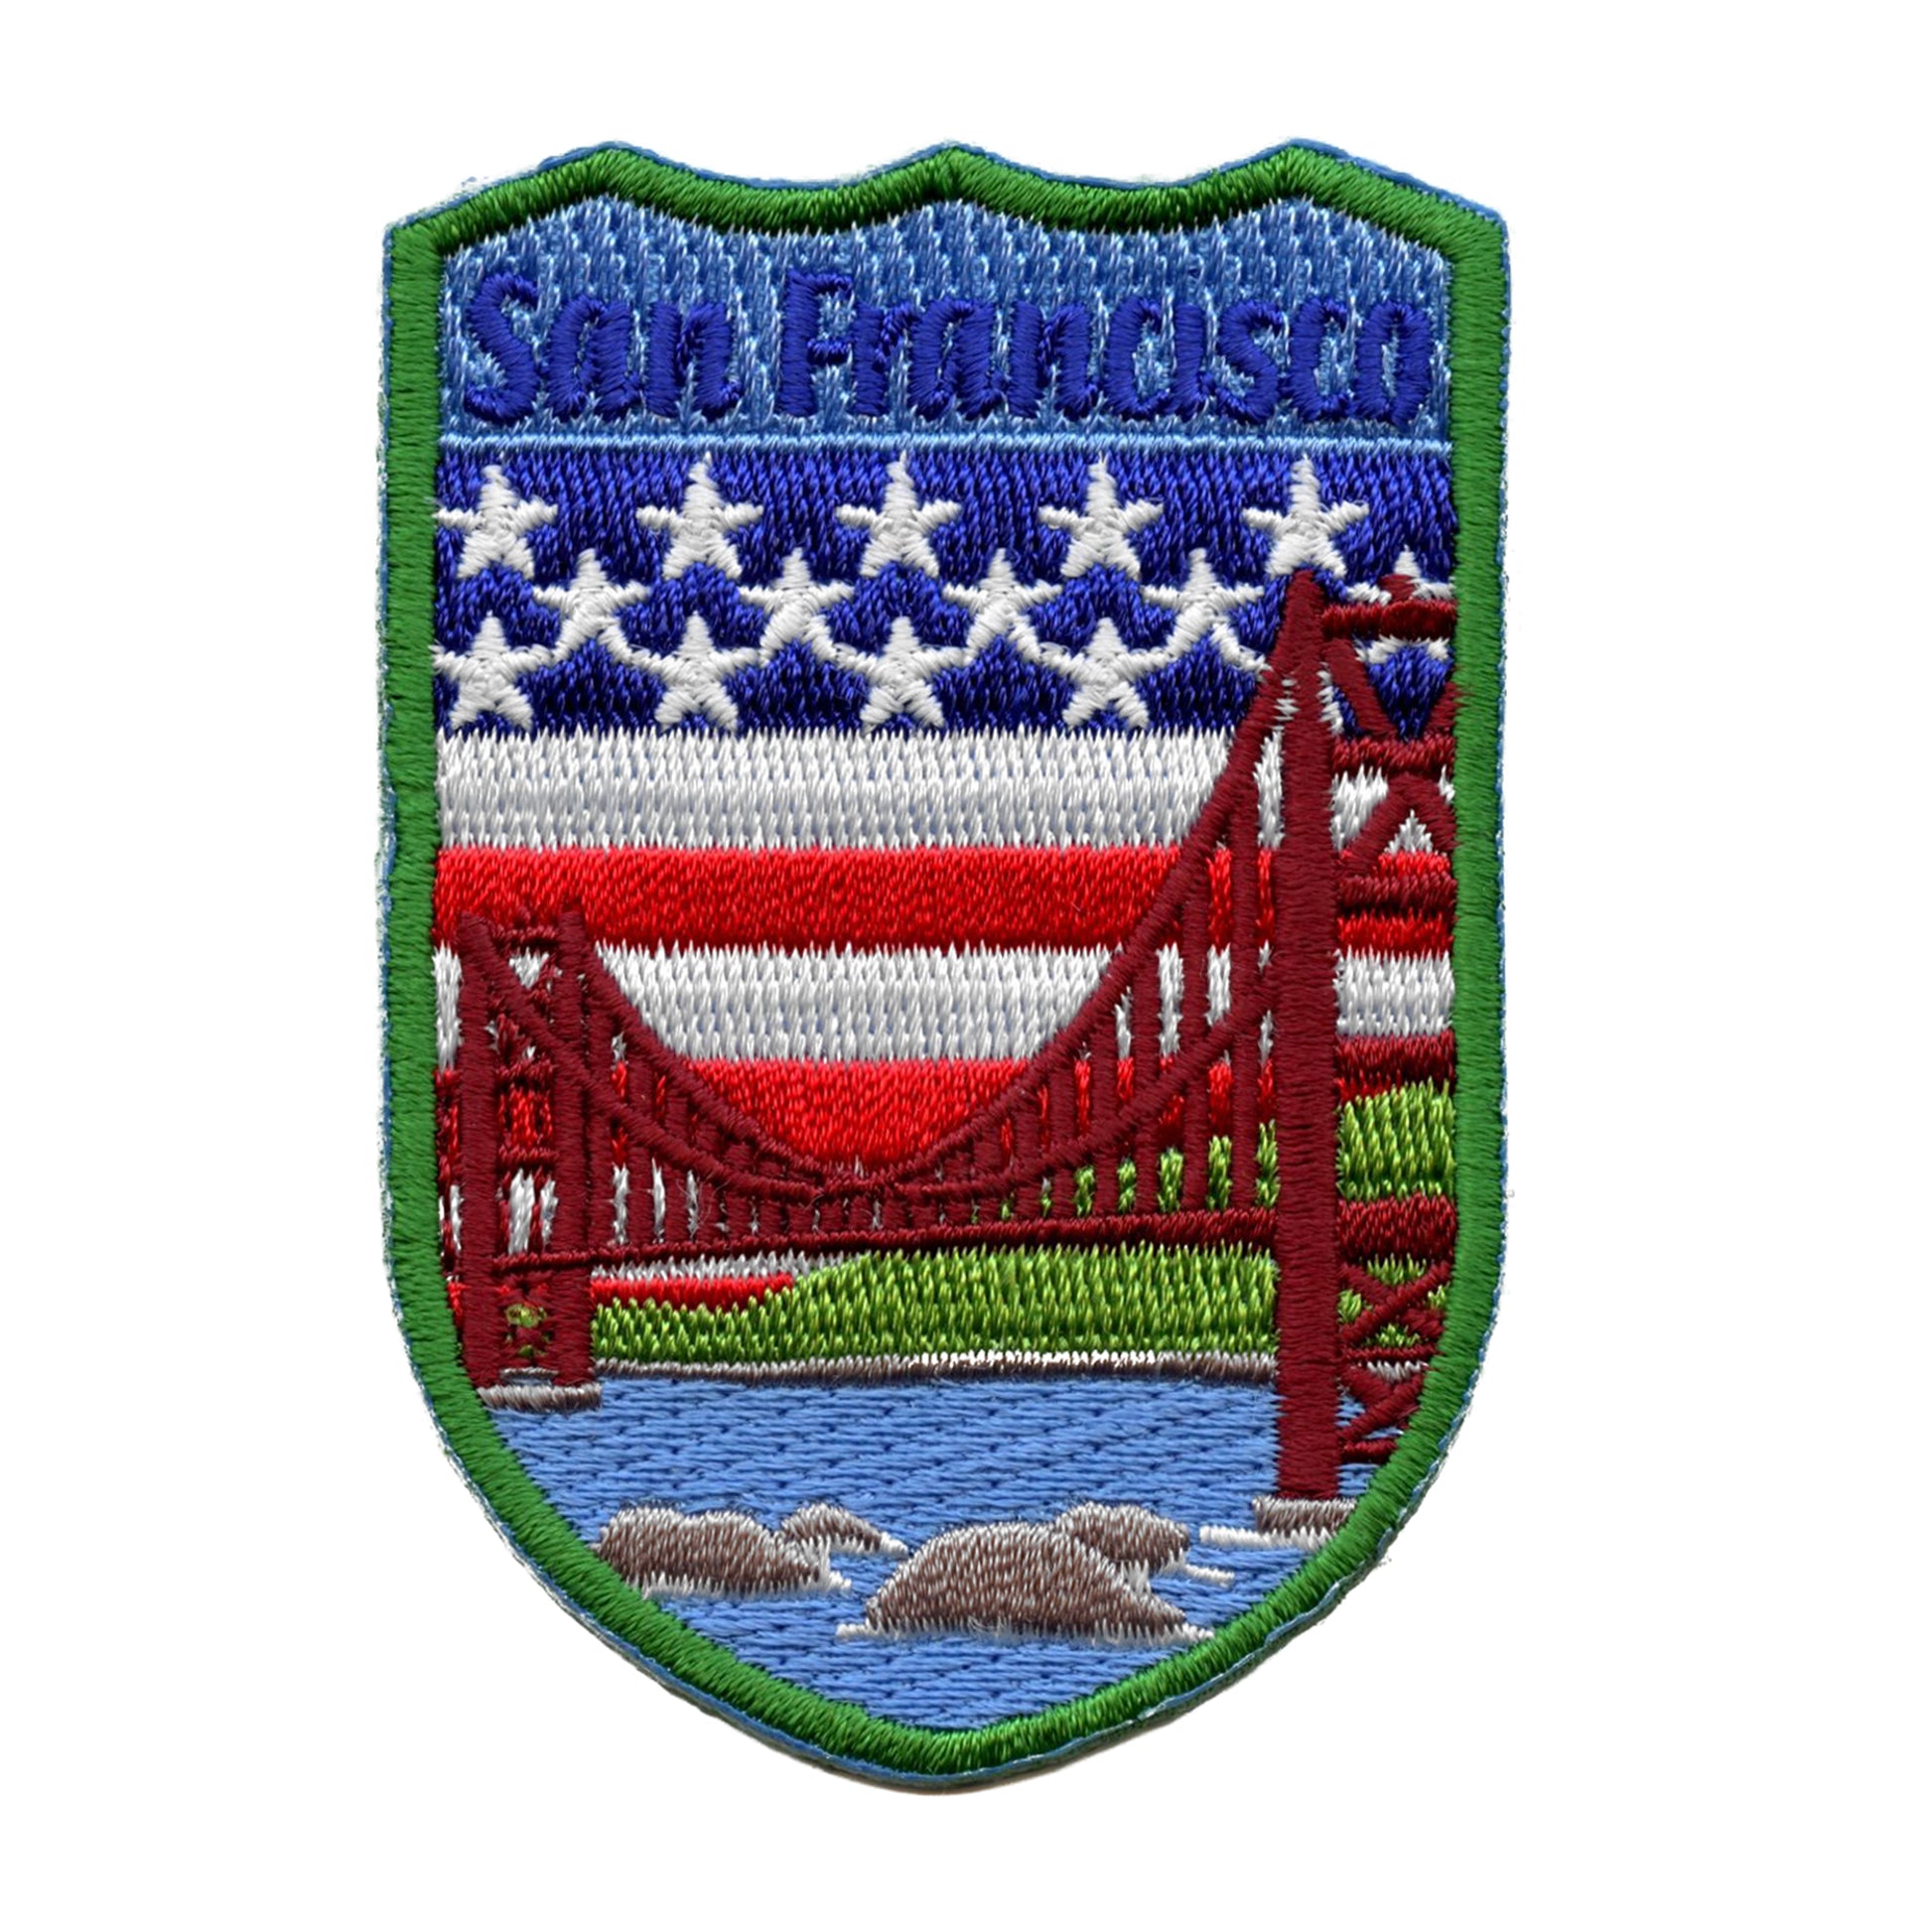 San Francisco California Shield Patch Travel Badge Memory Embroidered Iron On 